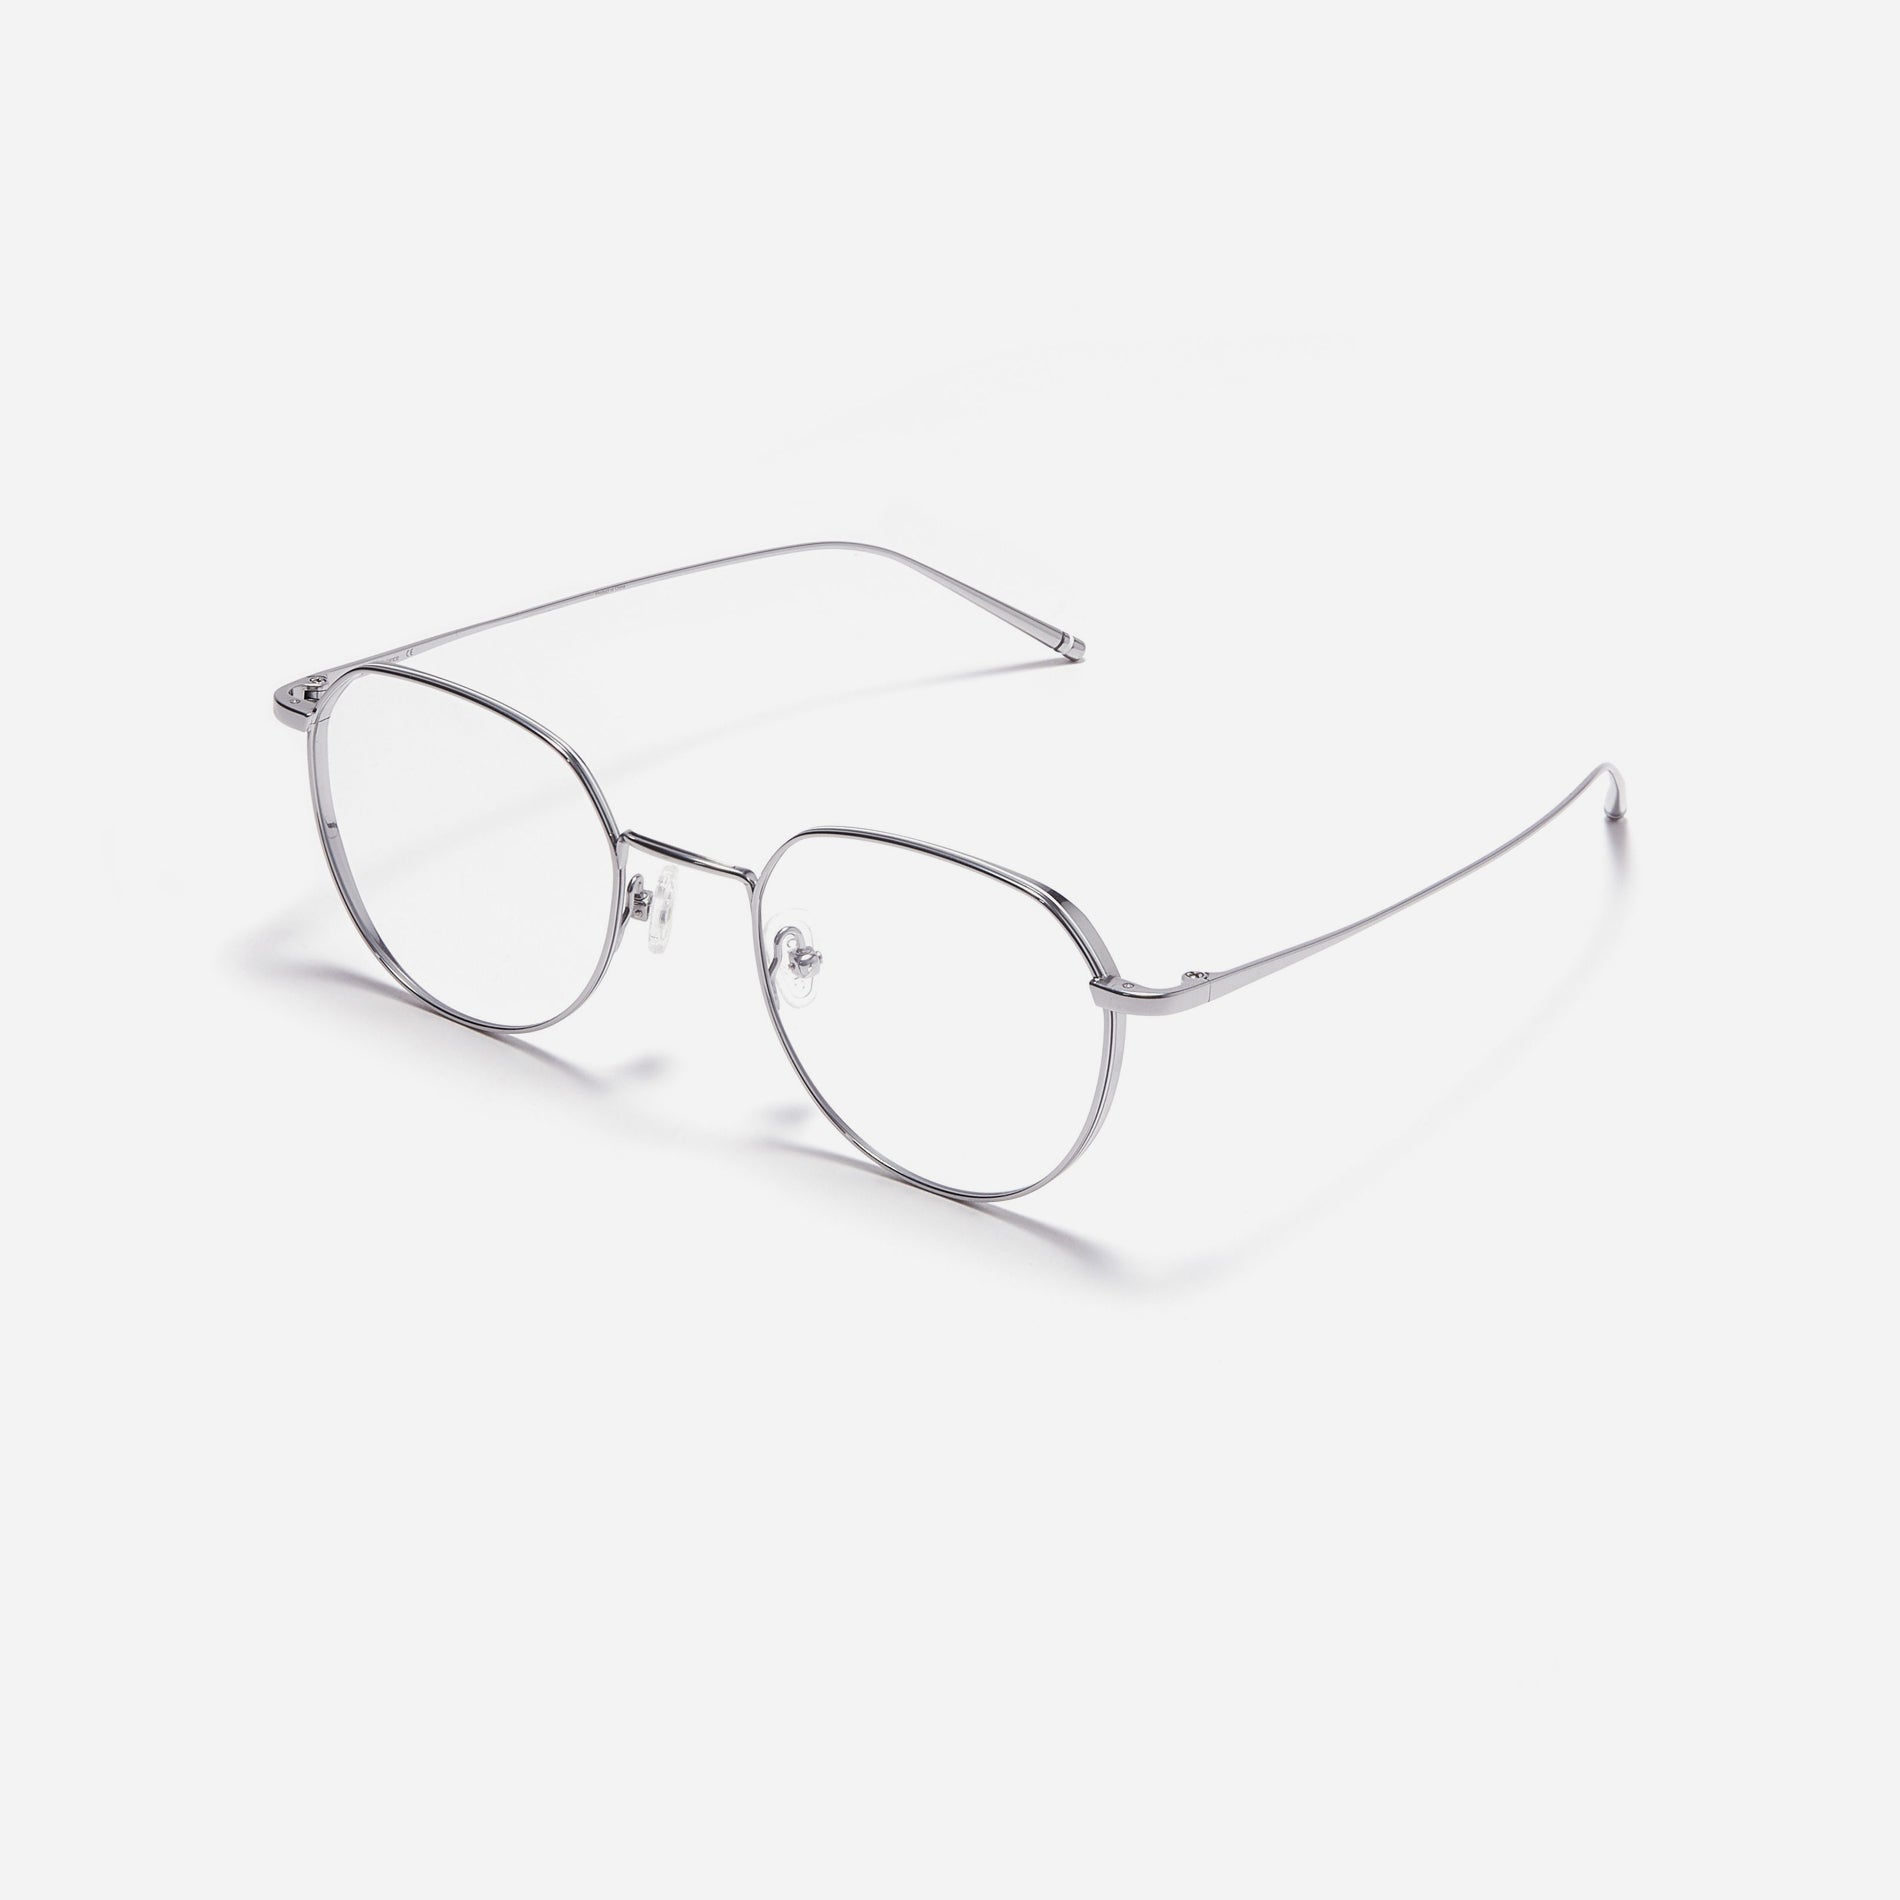 Polygonal-shaped, full-metal eyeglasses with a dual-rim structure designed to accommodate thicker, high-prescription lenses. Both the frame and temples are made of pure titanium, ensuring a lightweight and comfortable fit.